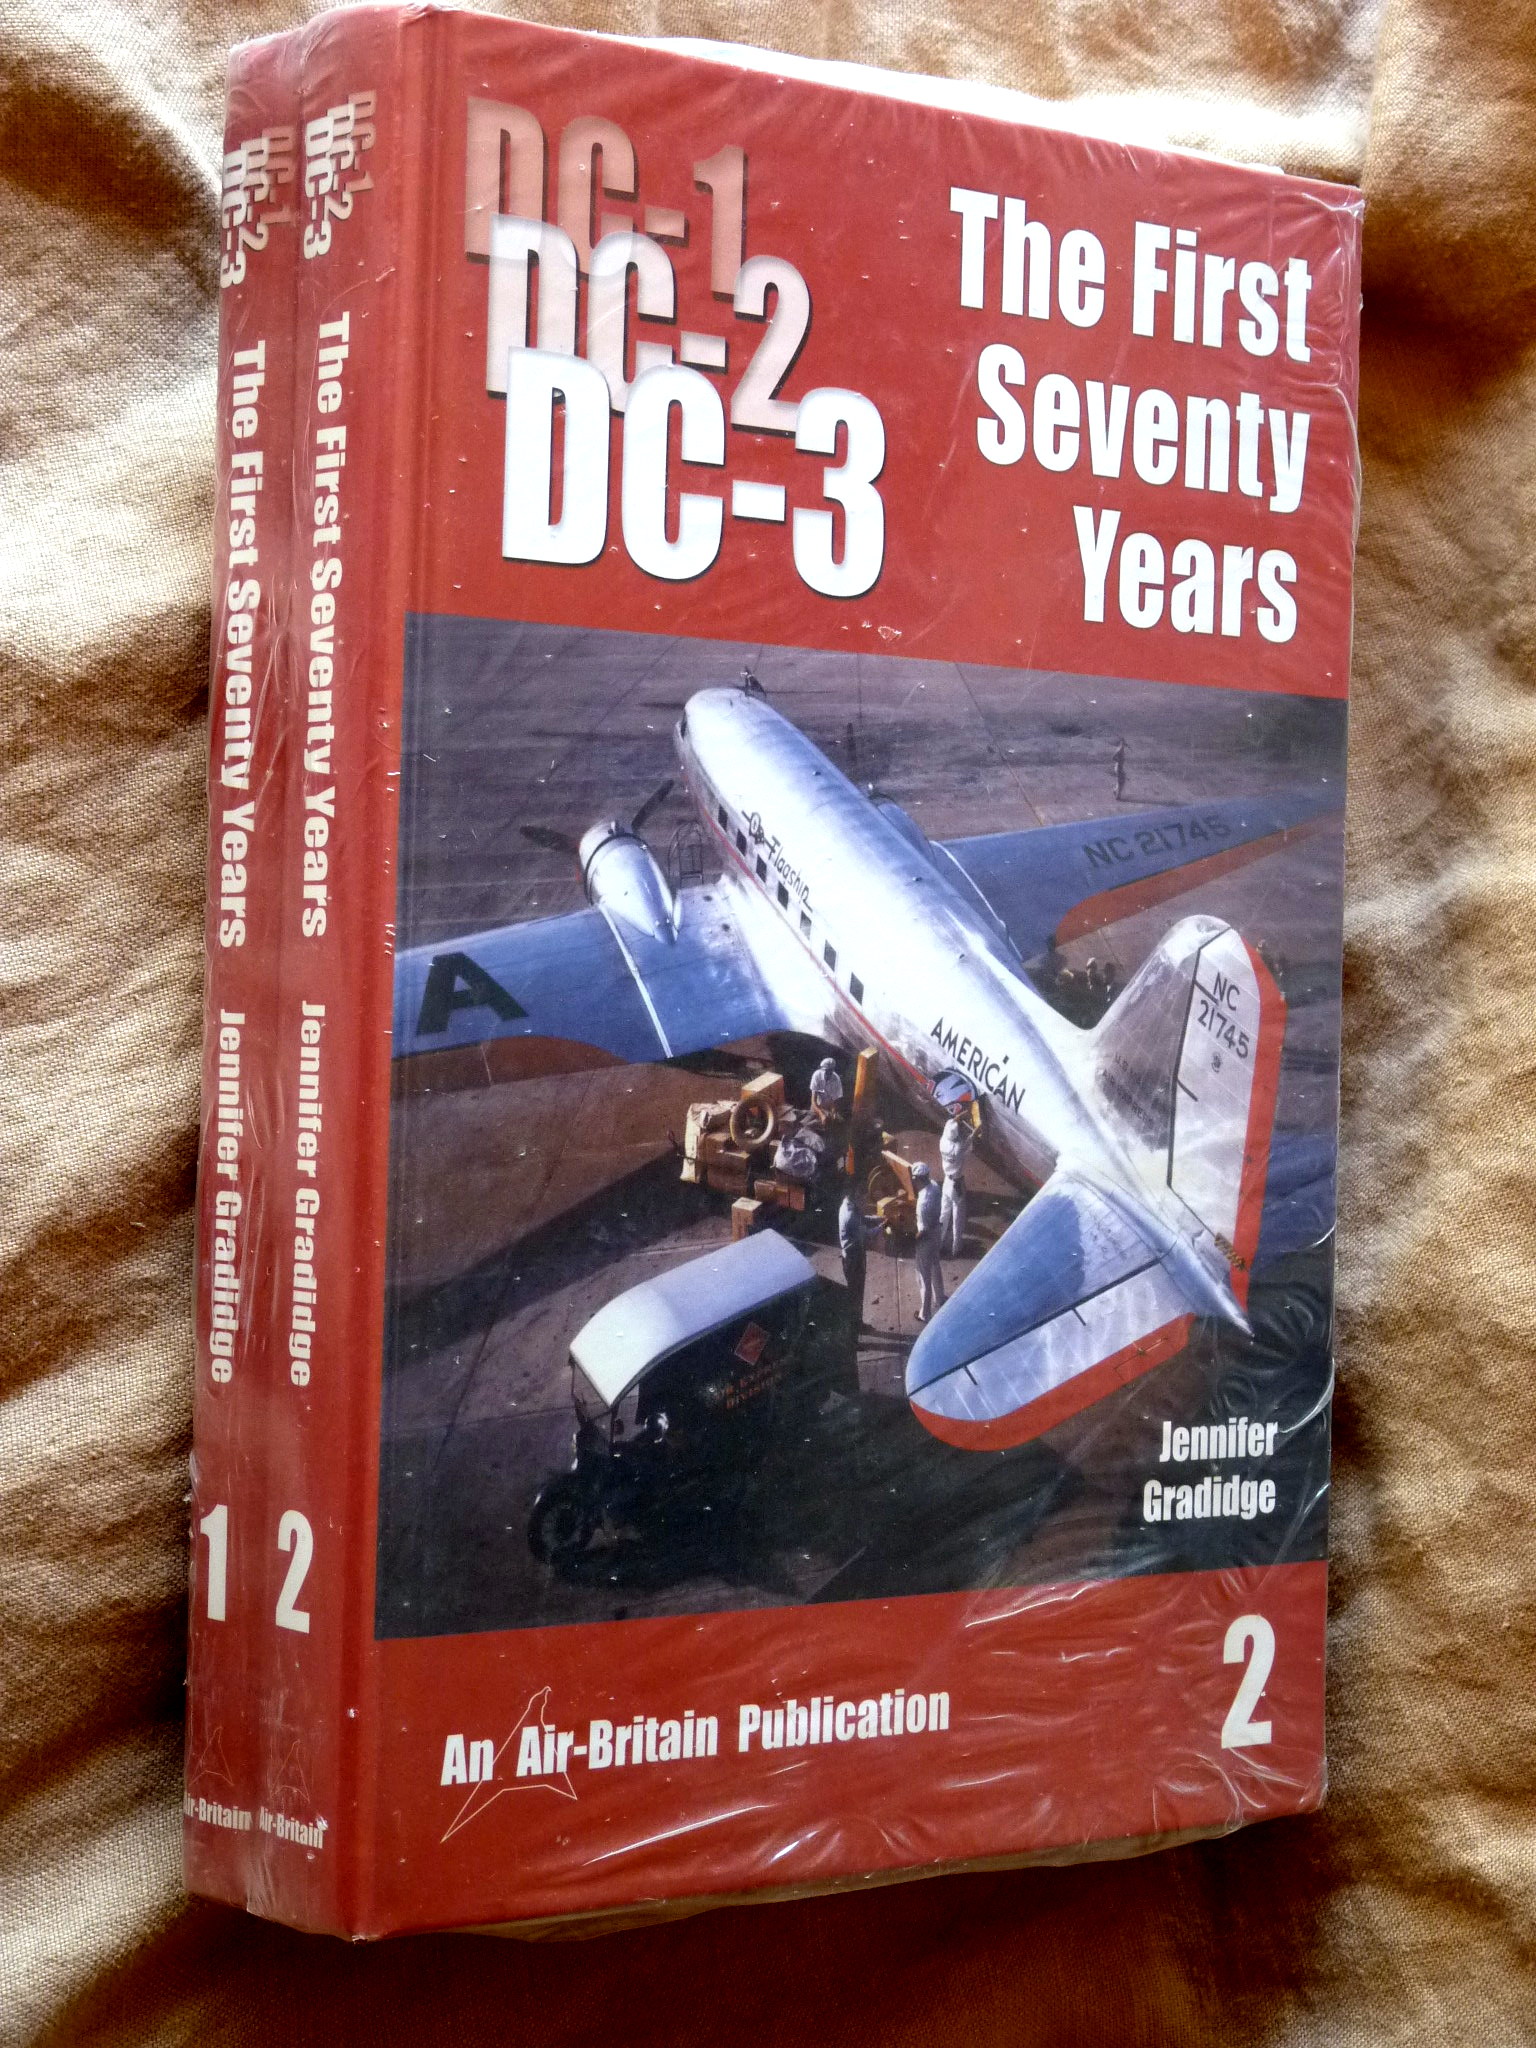 The Douglas DC-1,/DC-2,/DC-3: the first seventy years (volumes 1 & 2) - GRADIDGE, Jennifer M & Others